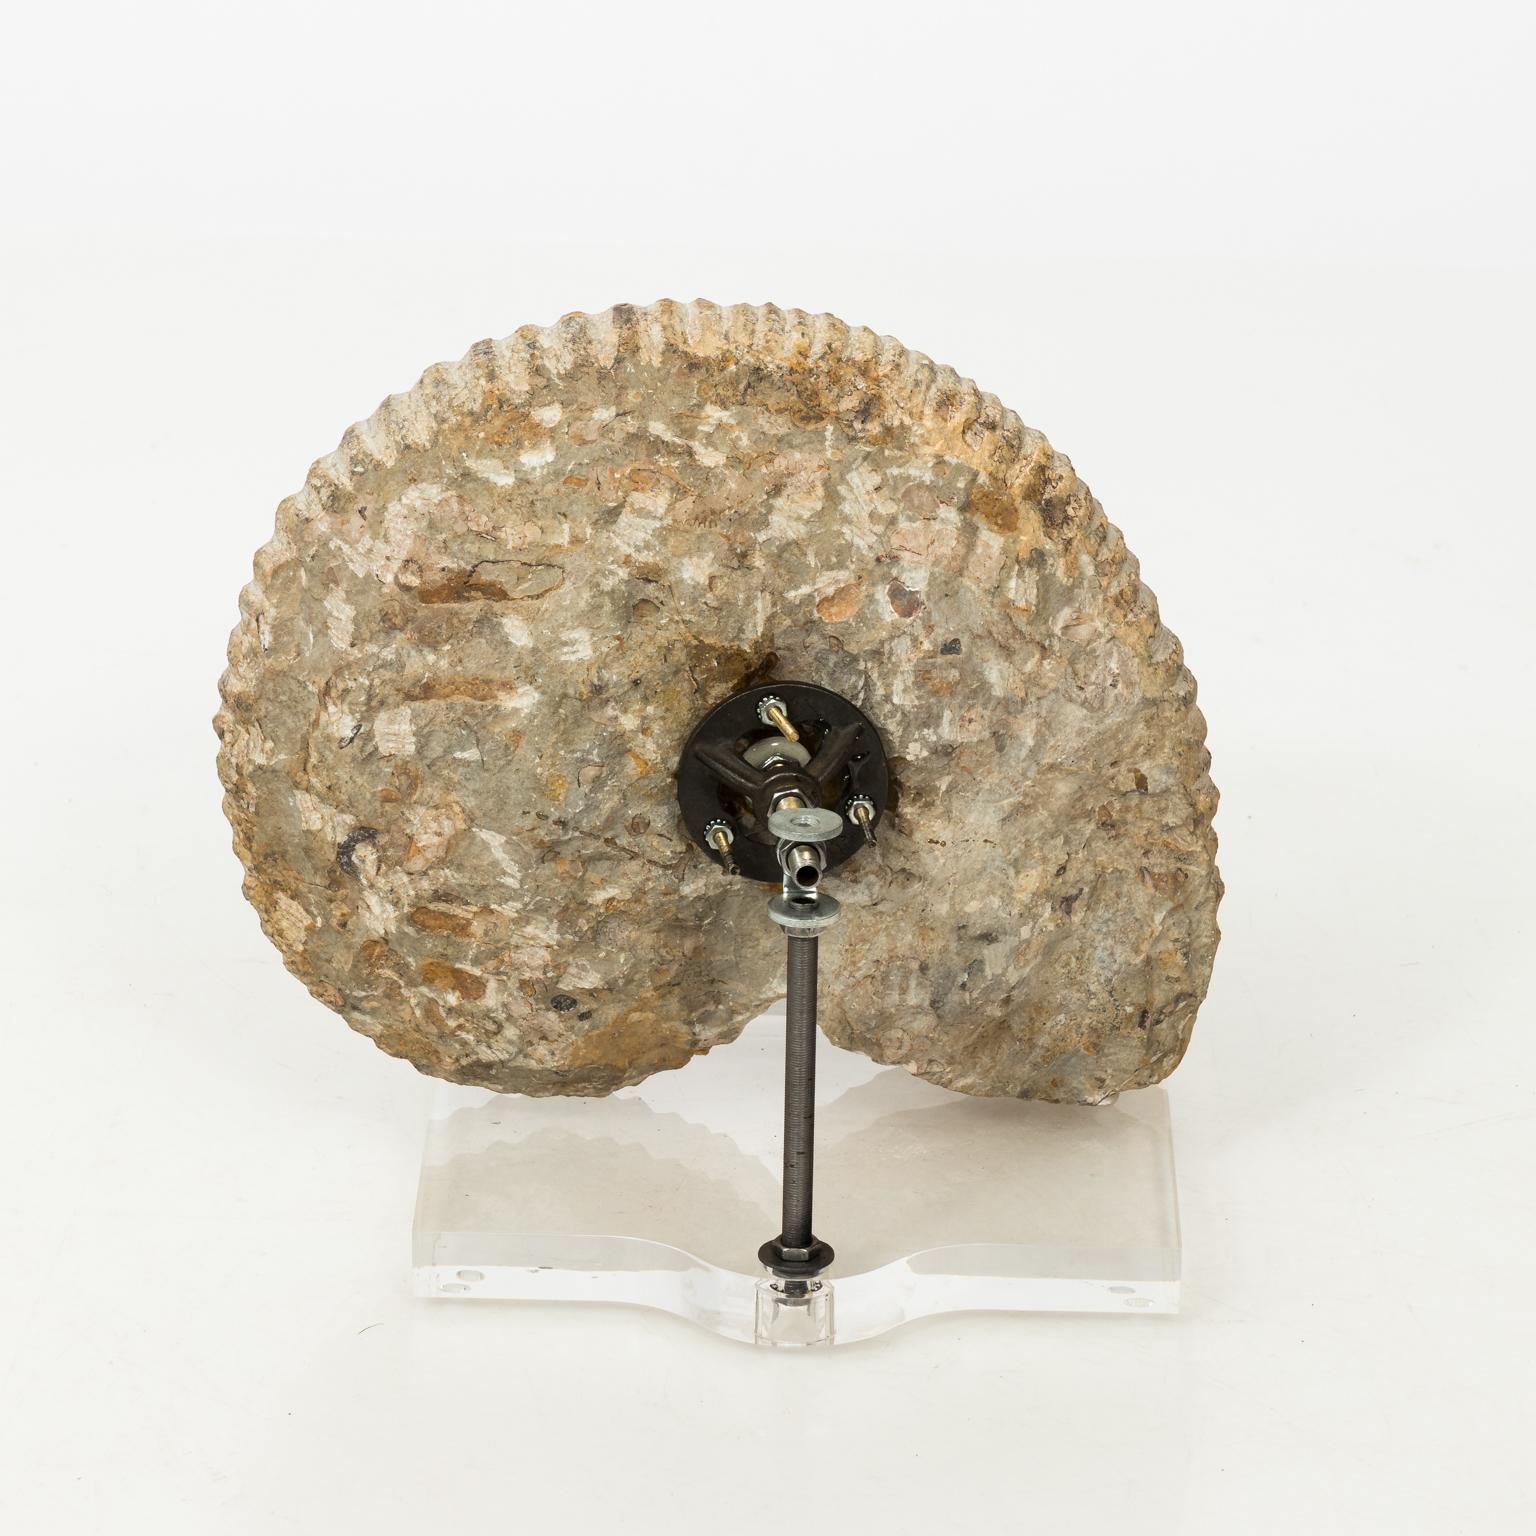 Contemporary Display of Nautilus Fossil 1